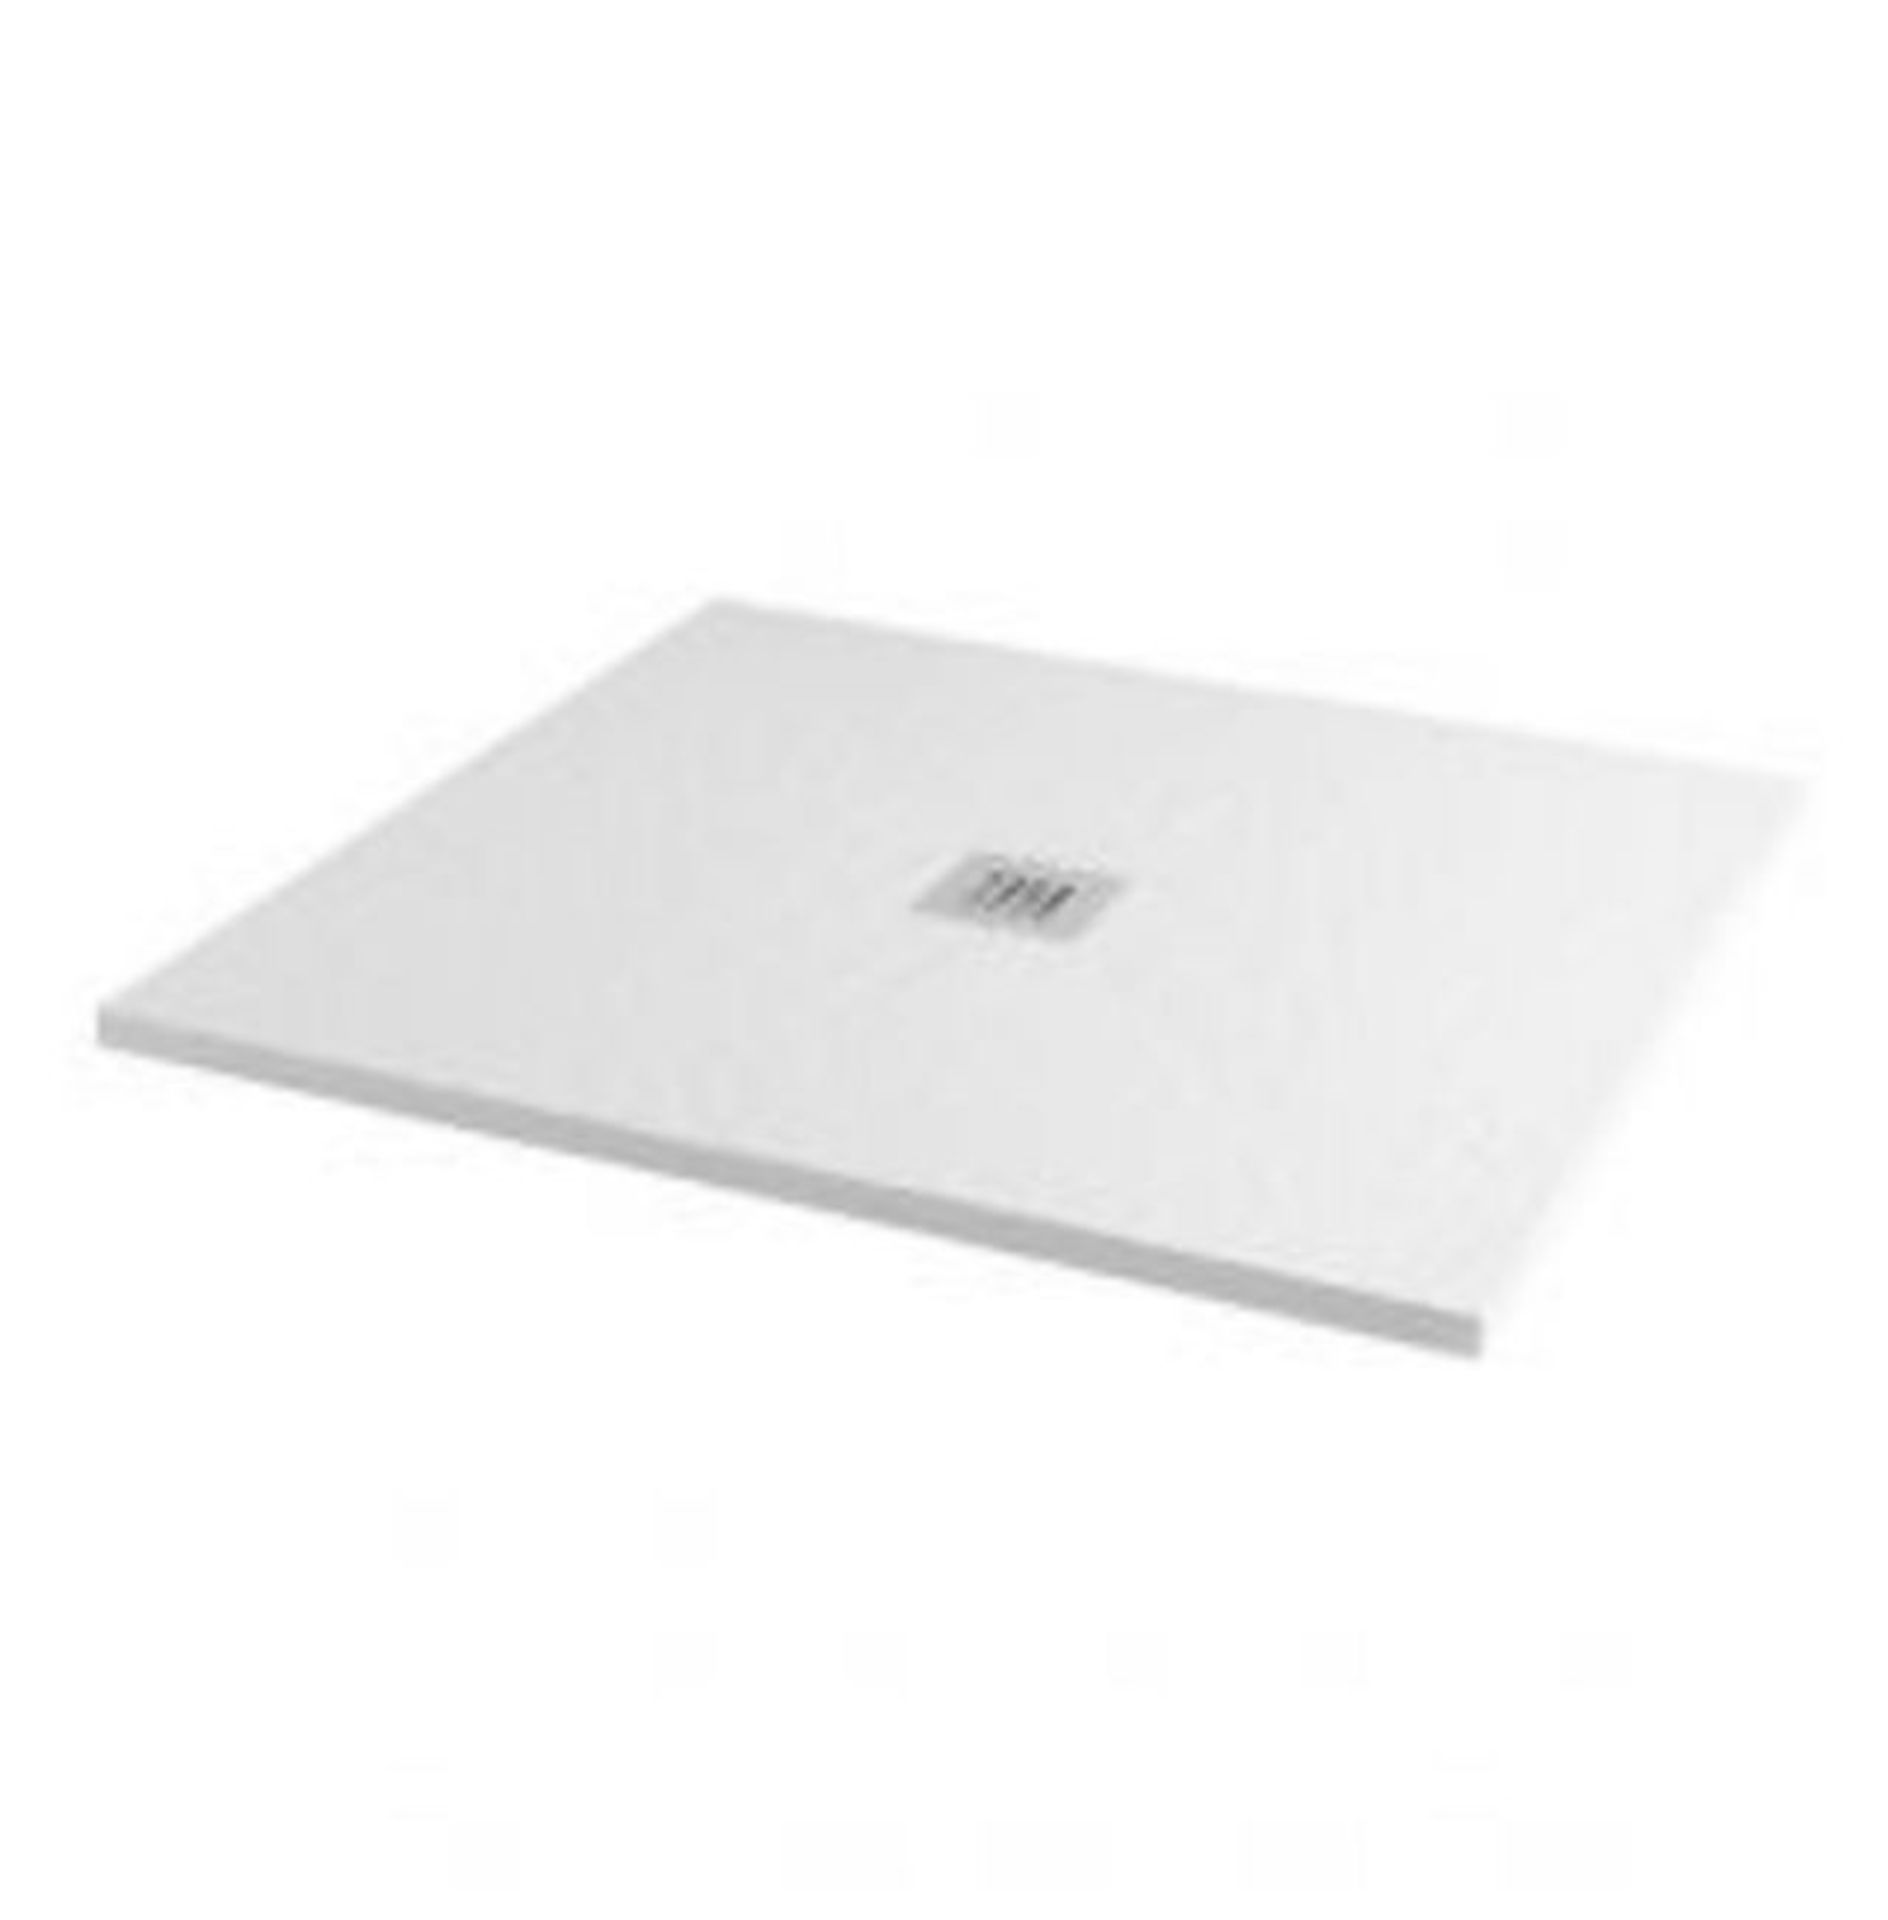 New 900x900 mm Square White Slate Effect Shower Tray. Handcrafted From High-Grade Stone Resin,... - Image 2 of 2